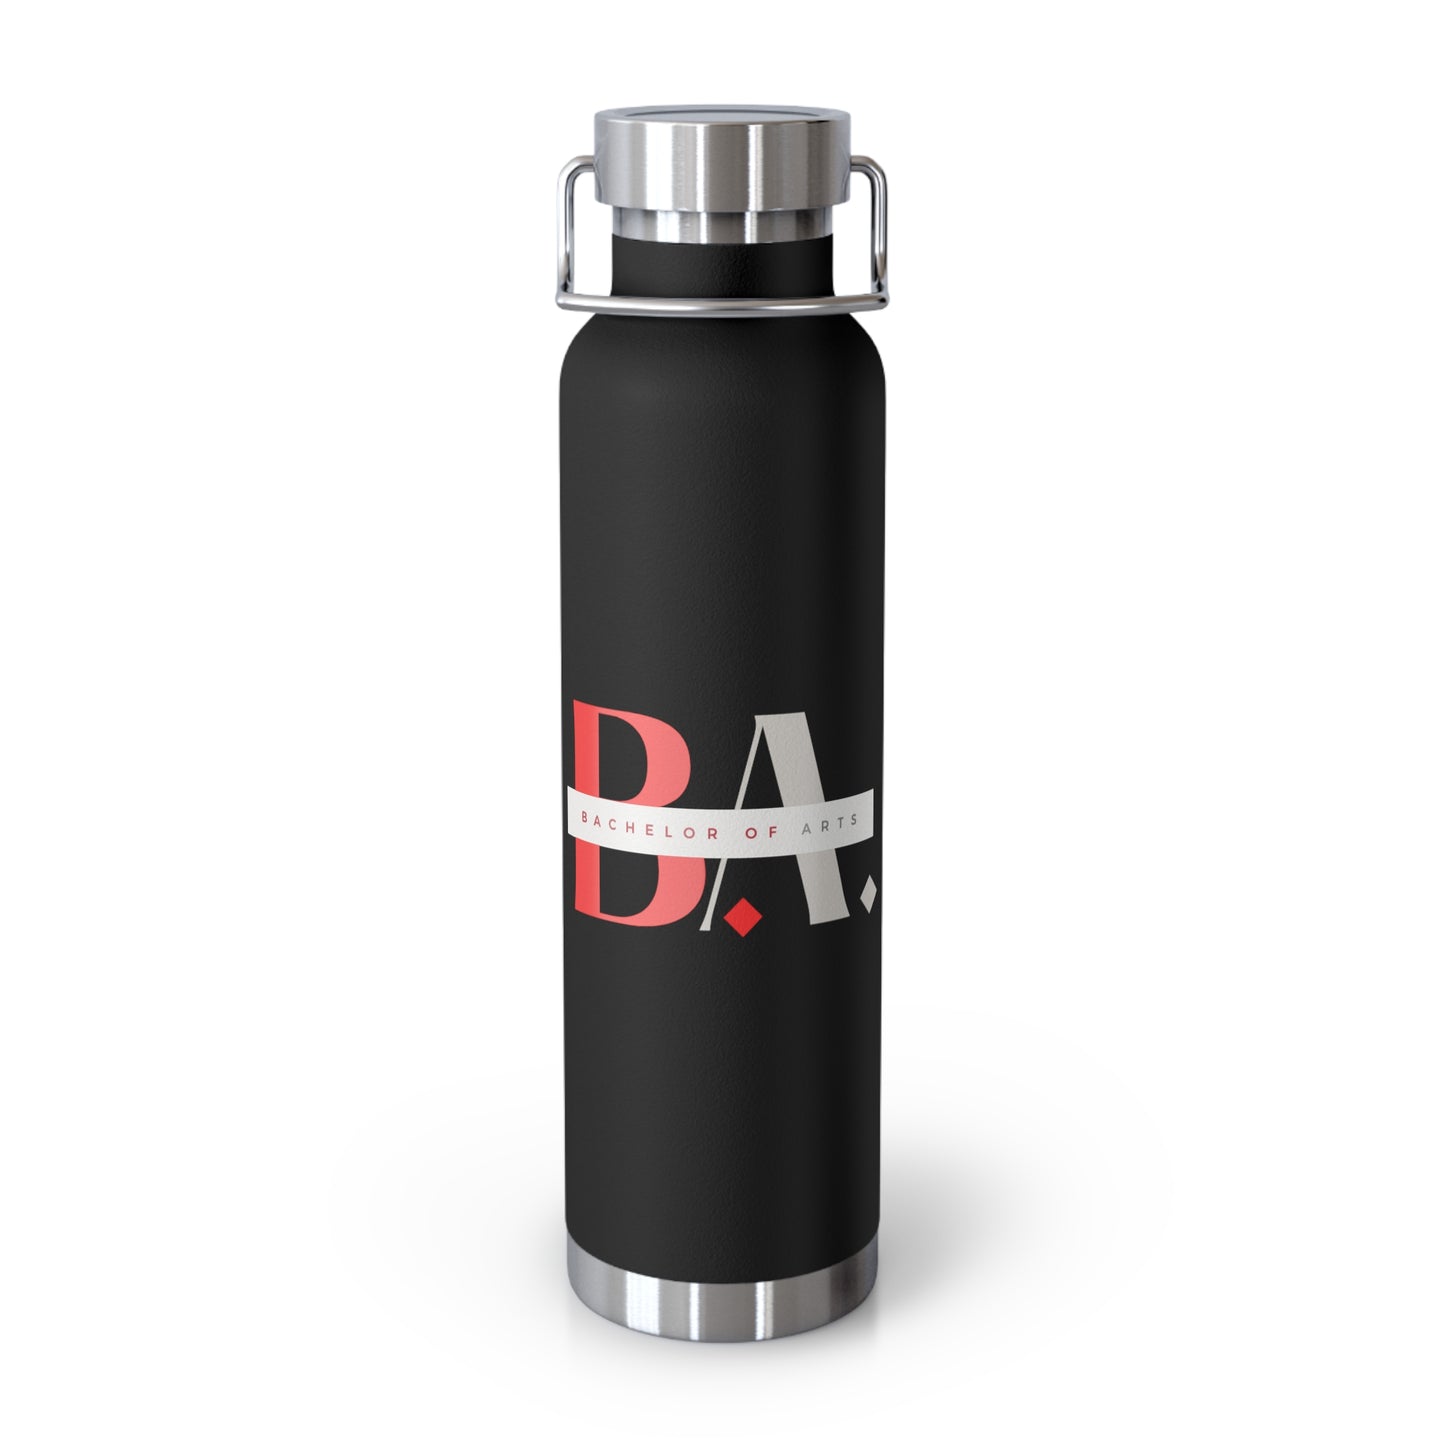 B.A. - Water tumbler with bachelor of arts credentials